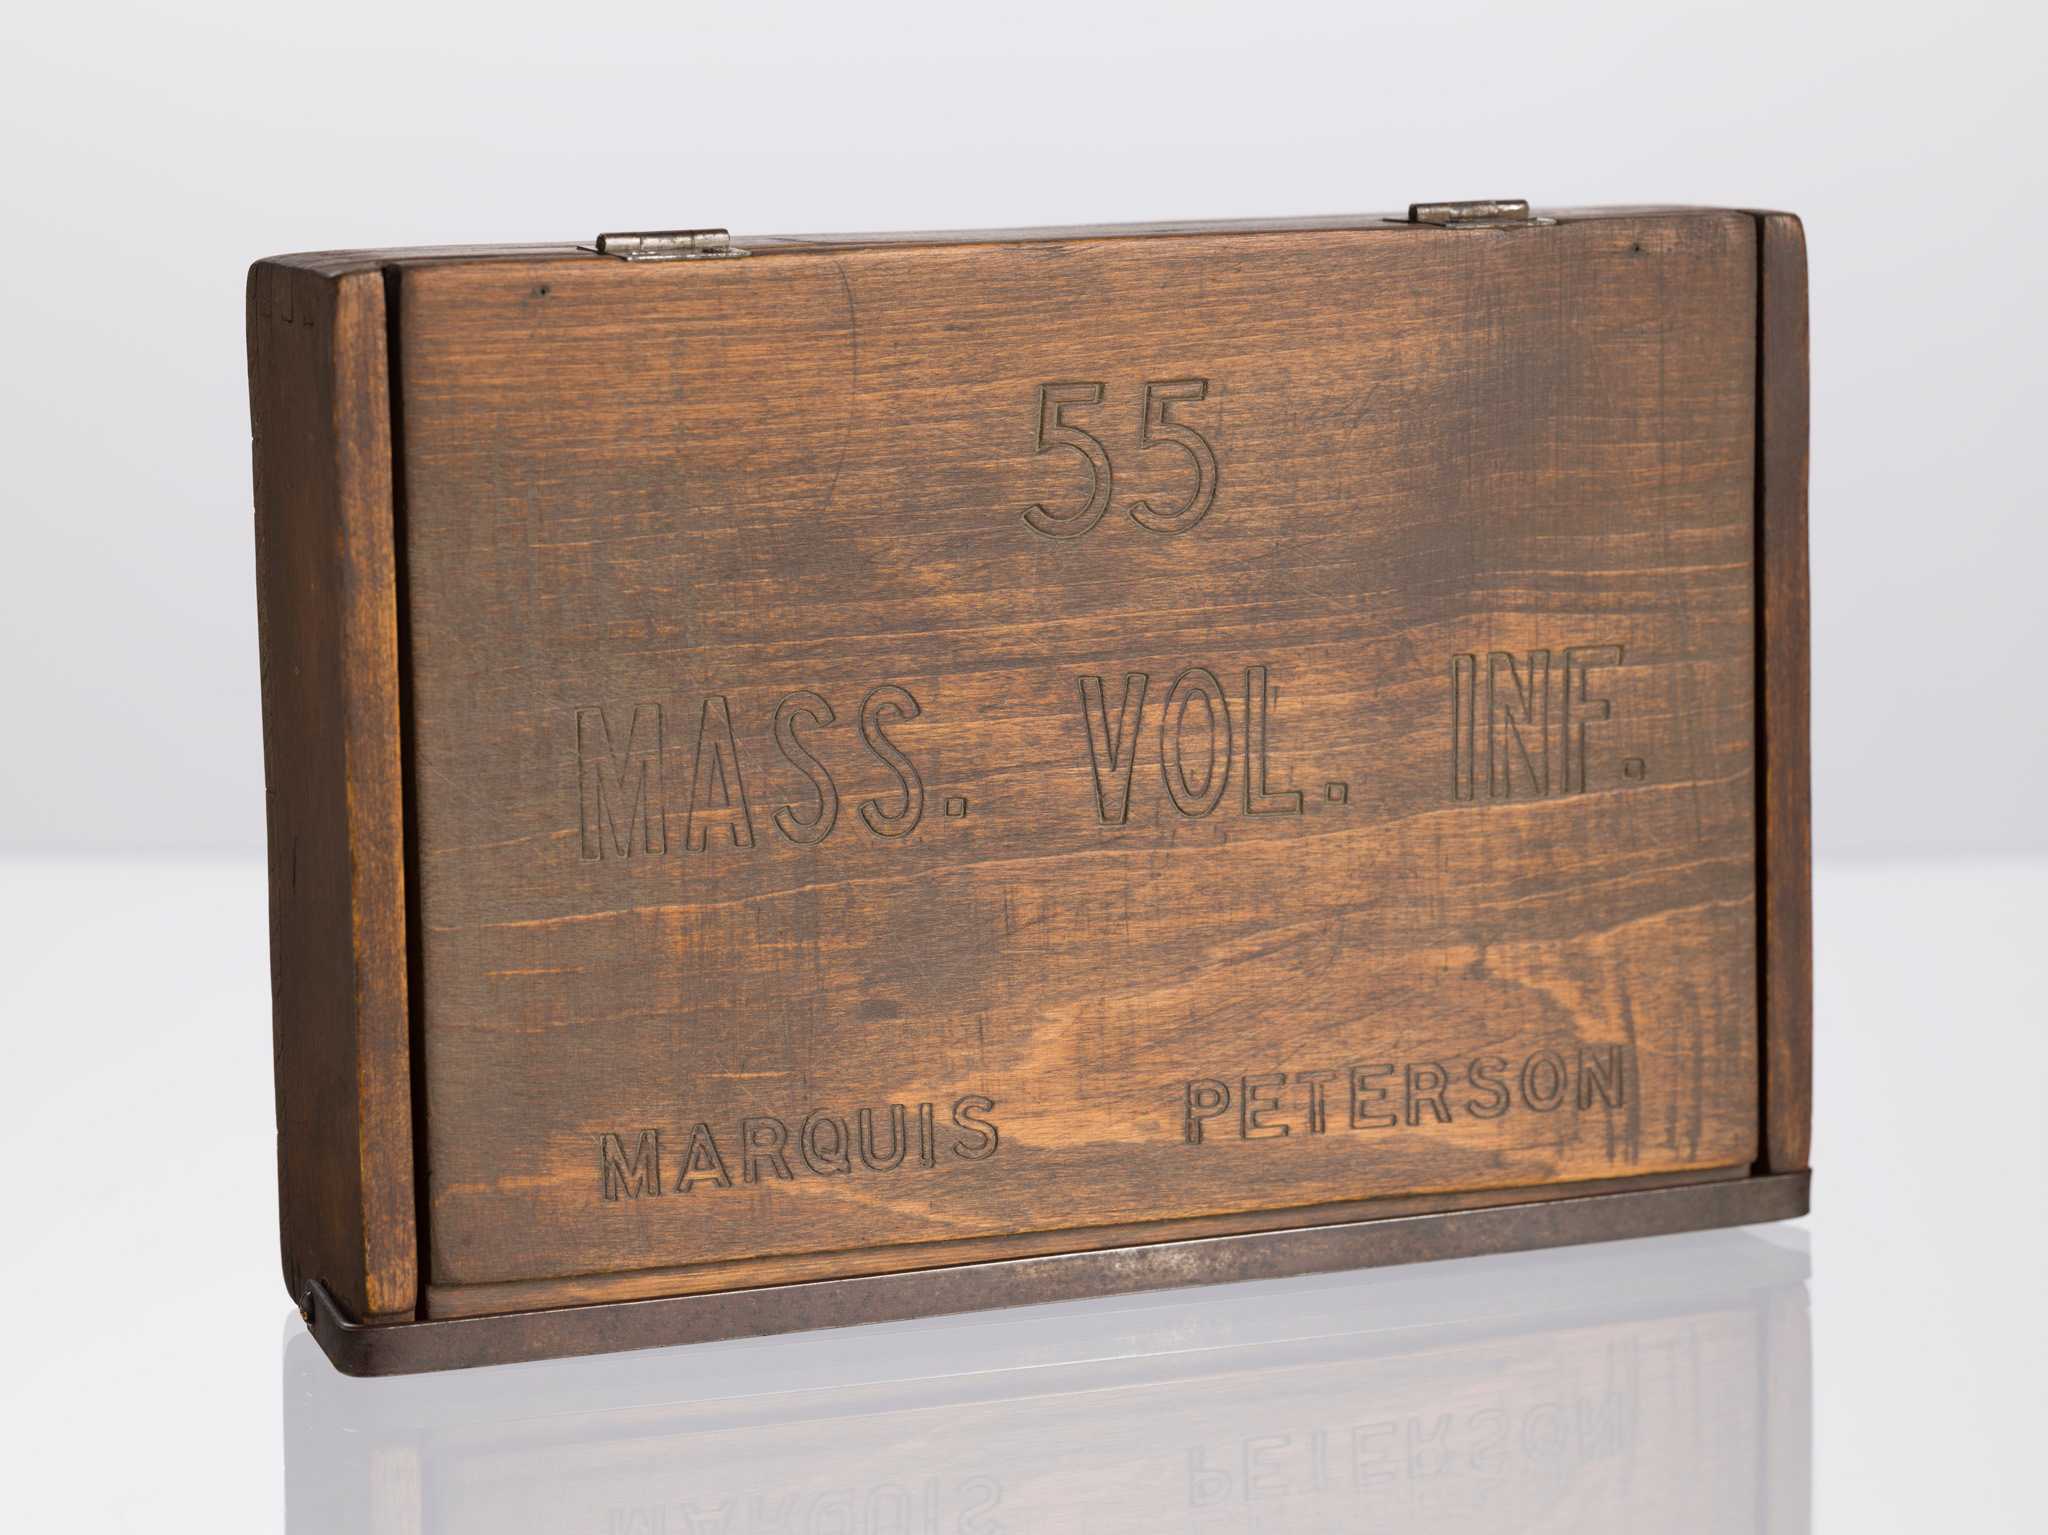 A wooden box owned by Marquis Peterson. The rectangular box is varnished brown and has a lid on top. Embossed on the lid is “55 / Mass. Vol. Inf. / Marquis Peterson.” The lid is connected to the box by two metal hinges. The sides of the box are constructed with dovetail joints and the bottom is nailed in place. A metal clasp runs the length of the box and secures the lid in place at front.